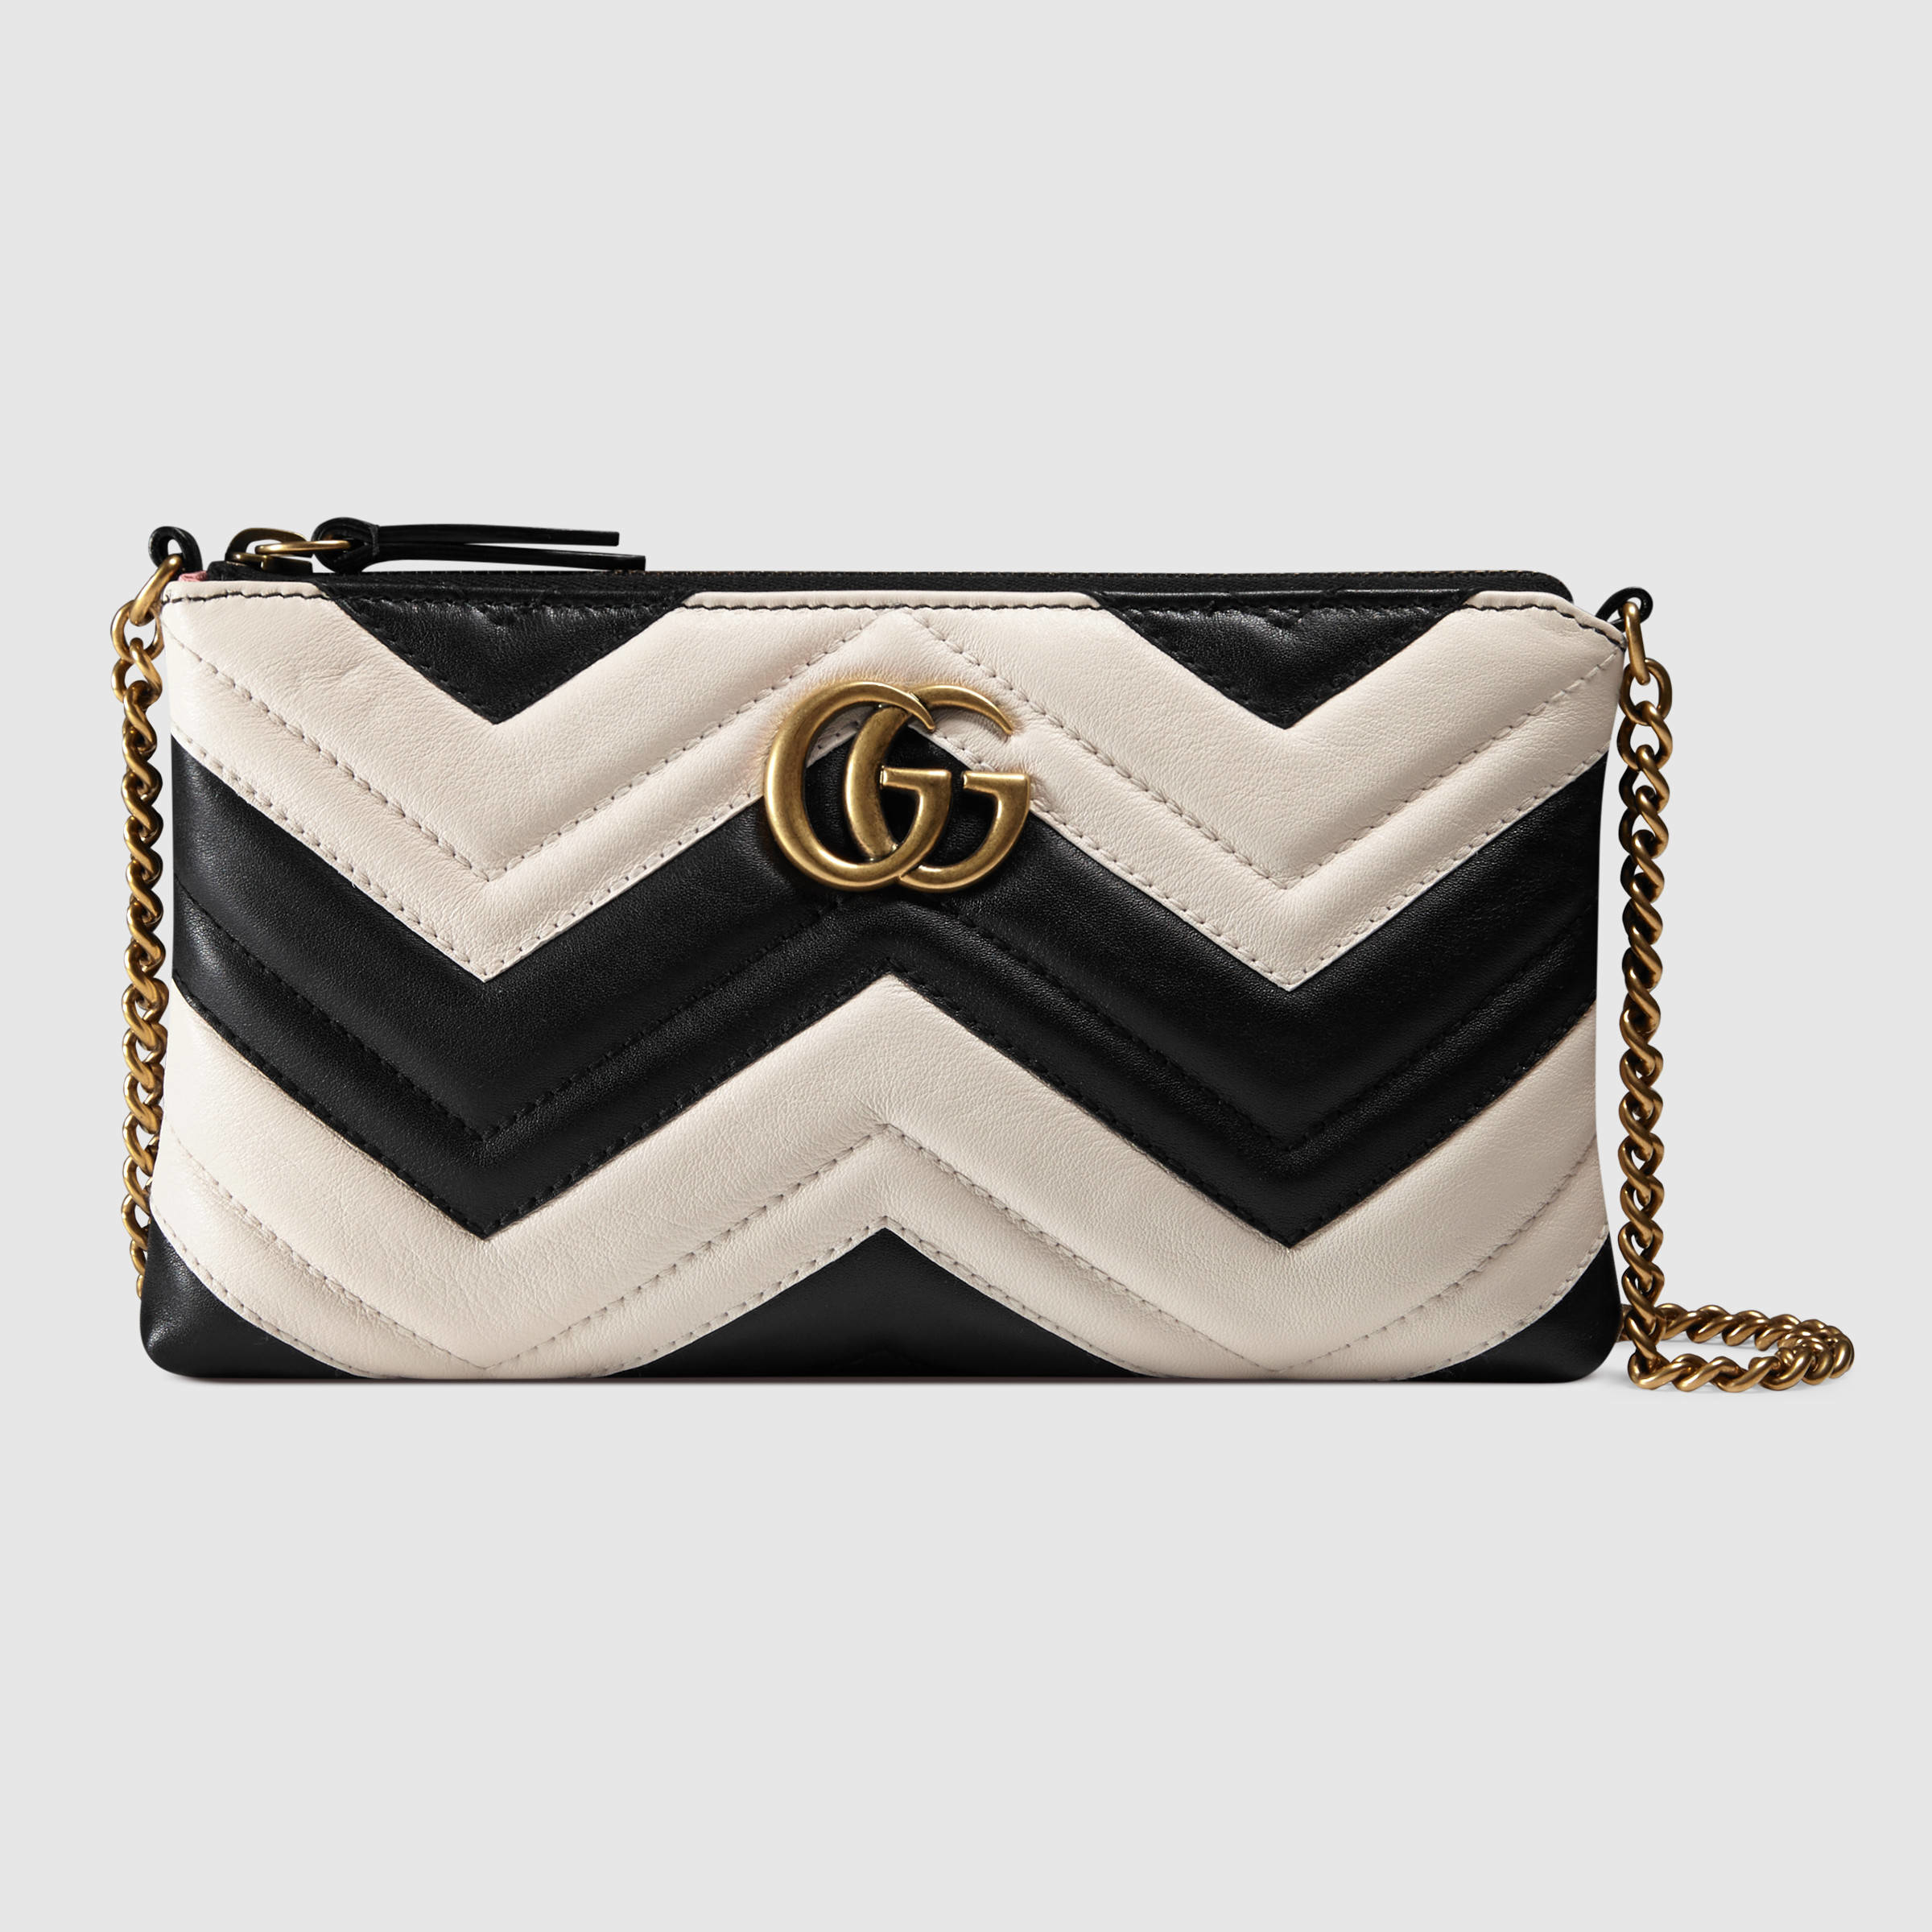 Gucci GG Marmont Mini Leather Chain Bag in Black - Lyst